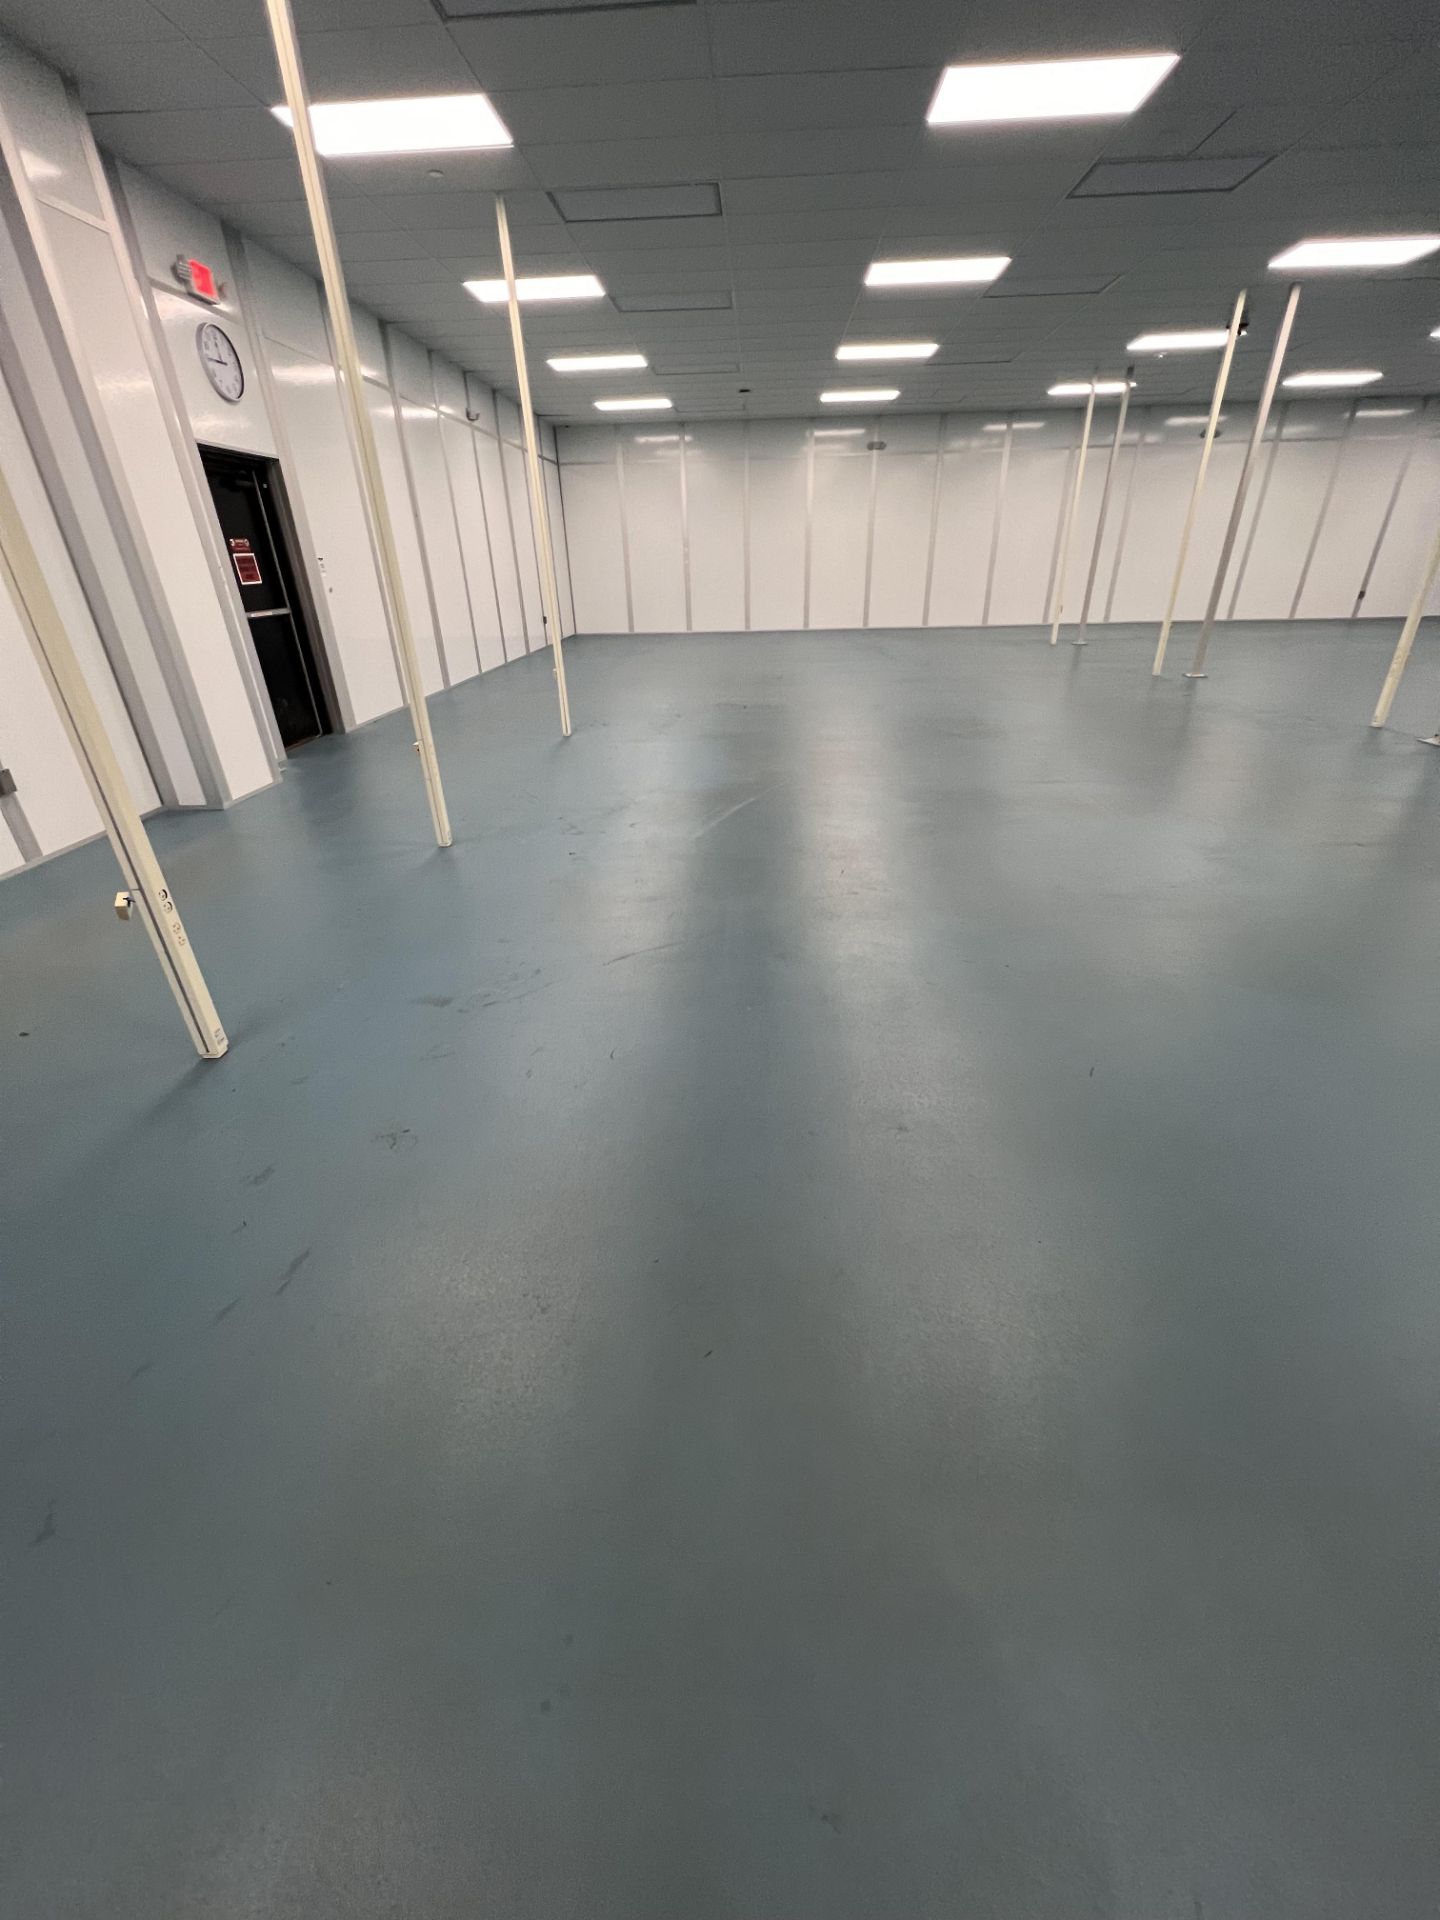 MODULAR CLEAN ROOM, APPROX. 60 FT X 60 FT X 11 FT 10 IN, INCLUDES HEPA FILTRATION UNITS - Image 23 of 34